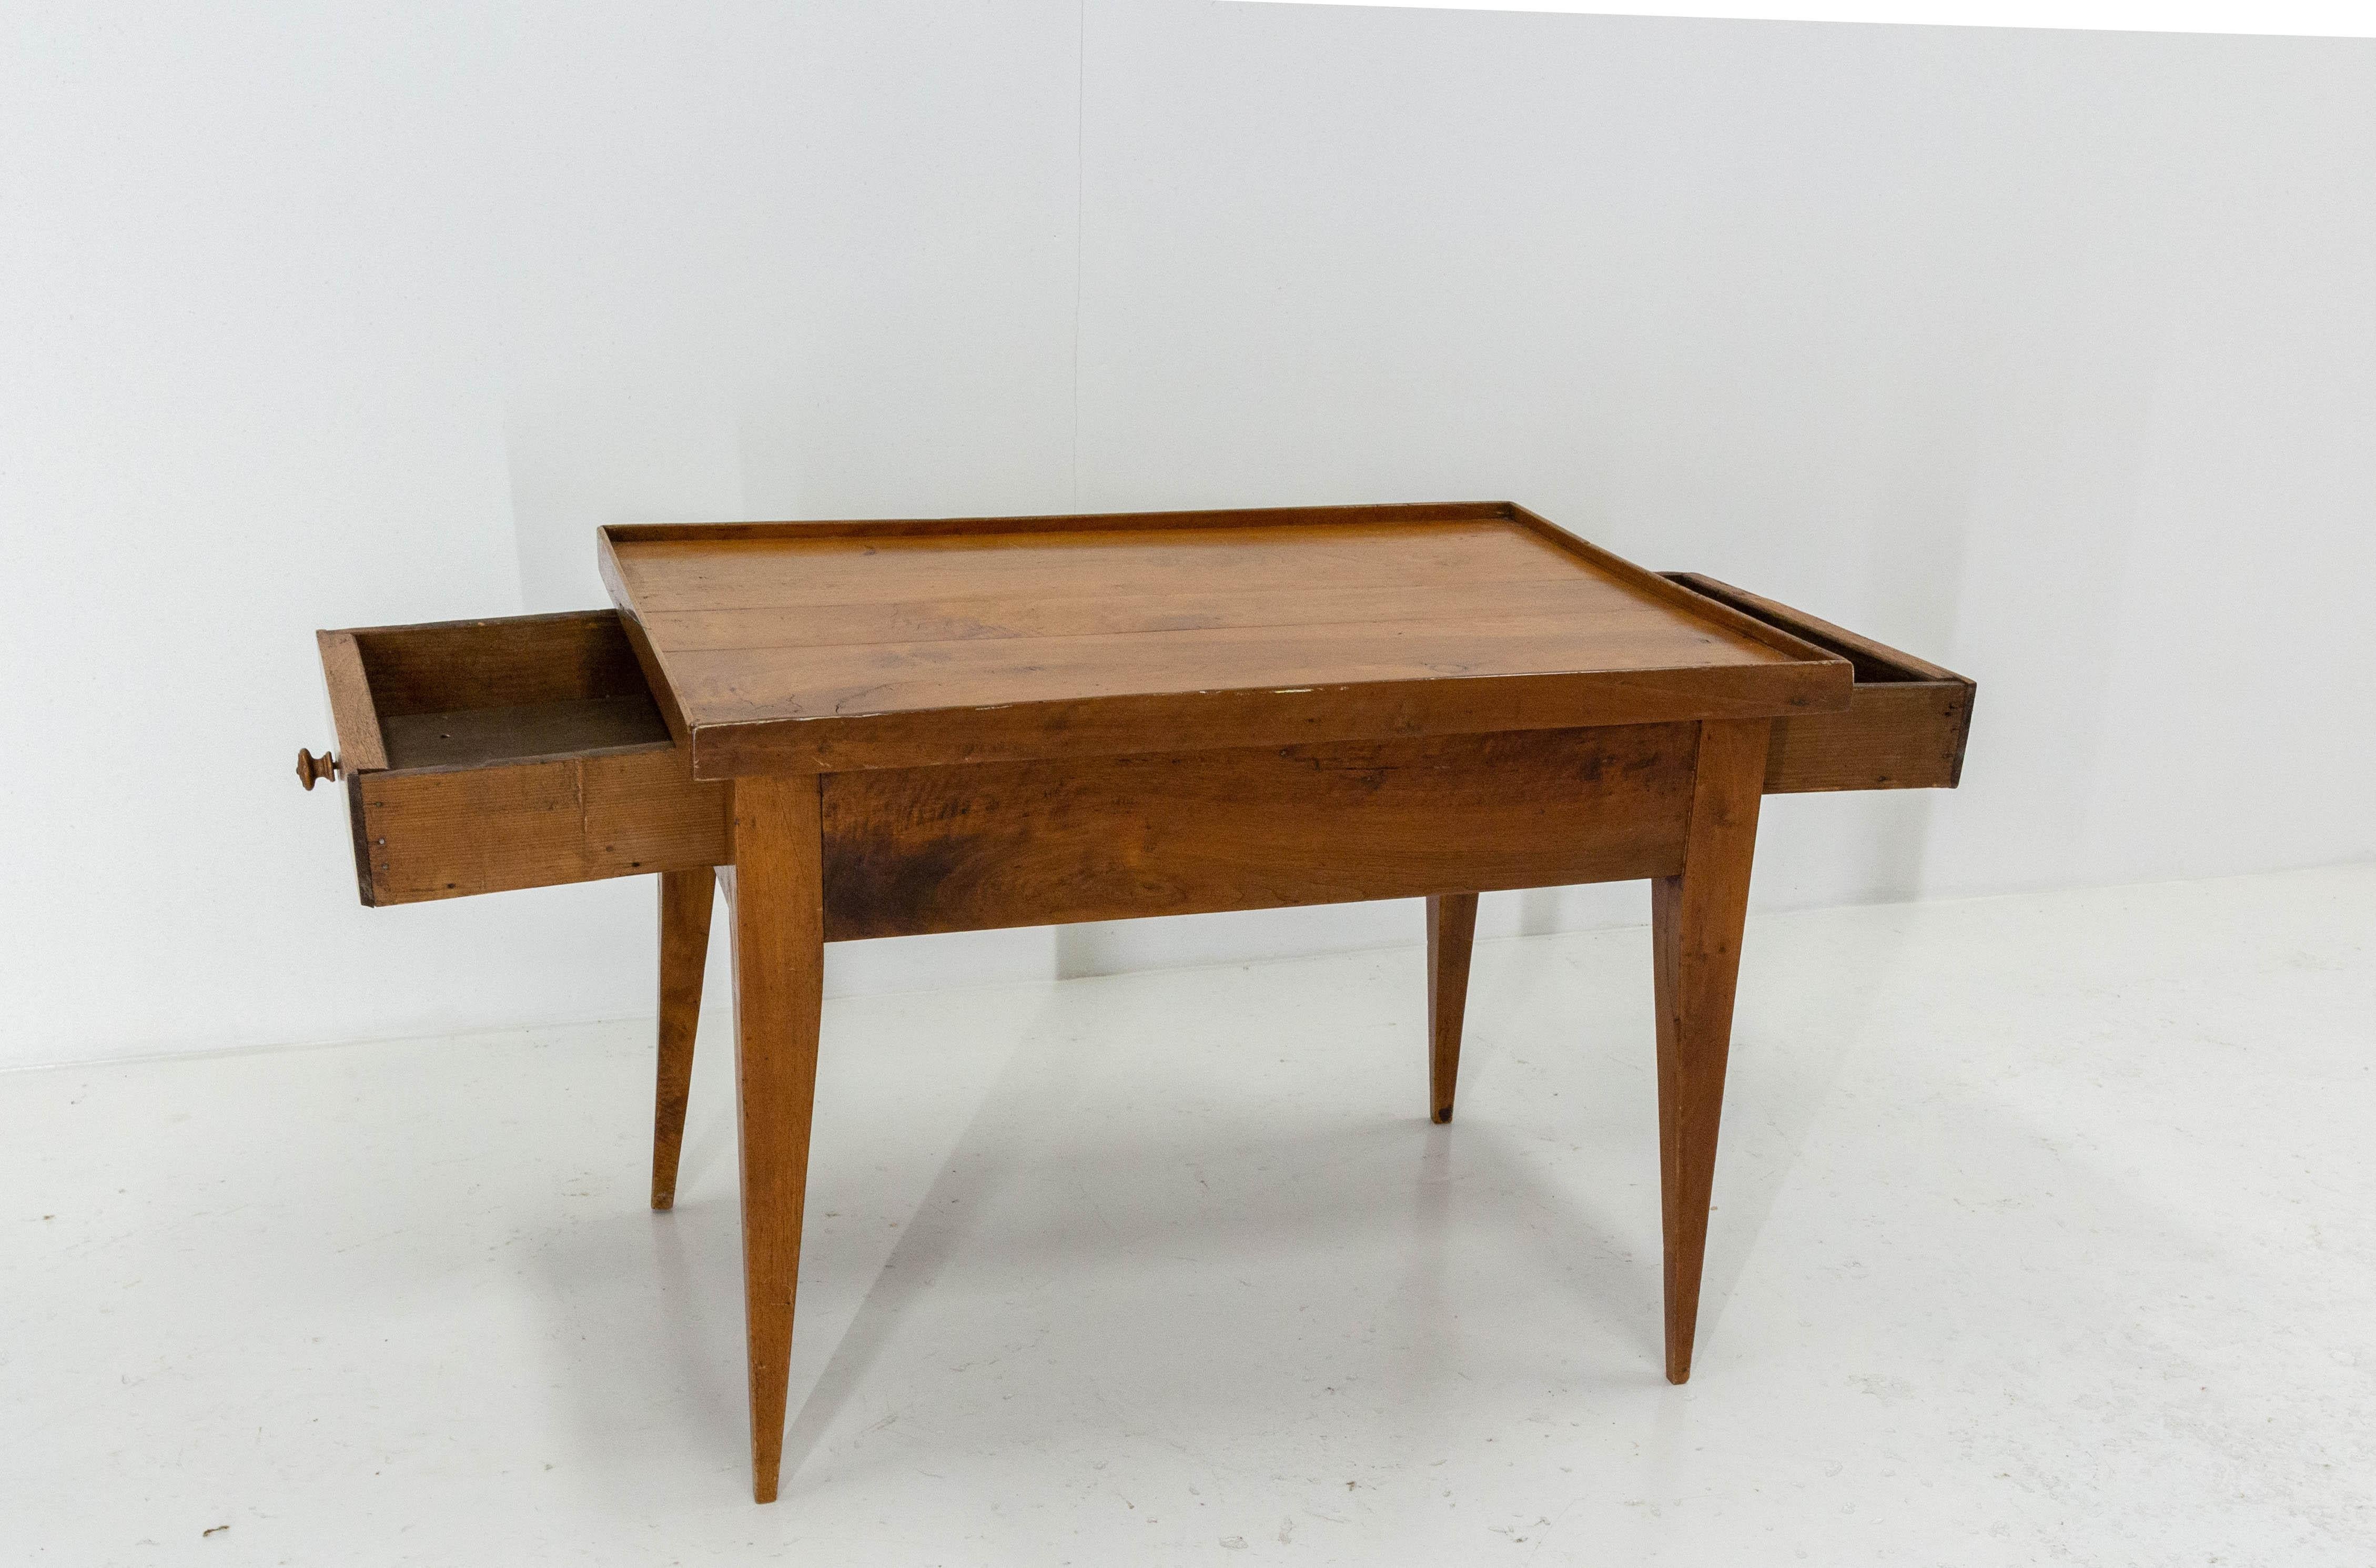 French Cherrywood Coffee Table with Drawers Country Style, Late 19th Century For Sale 4